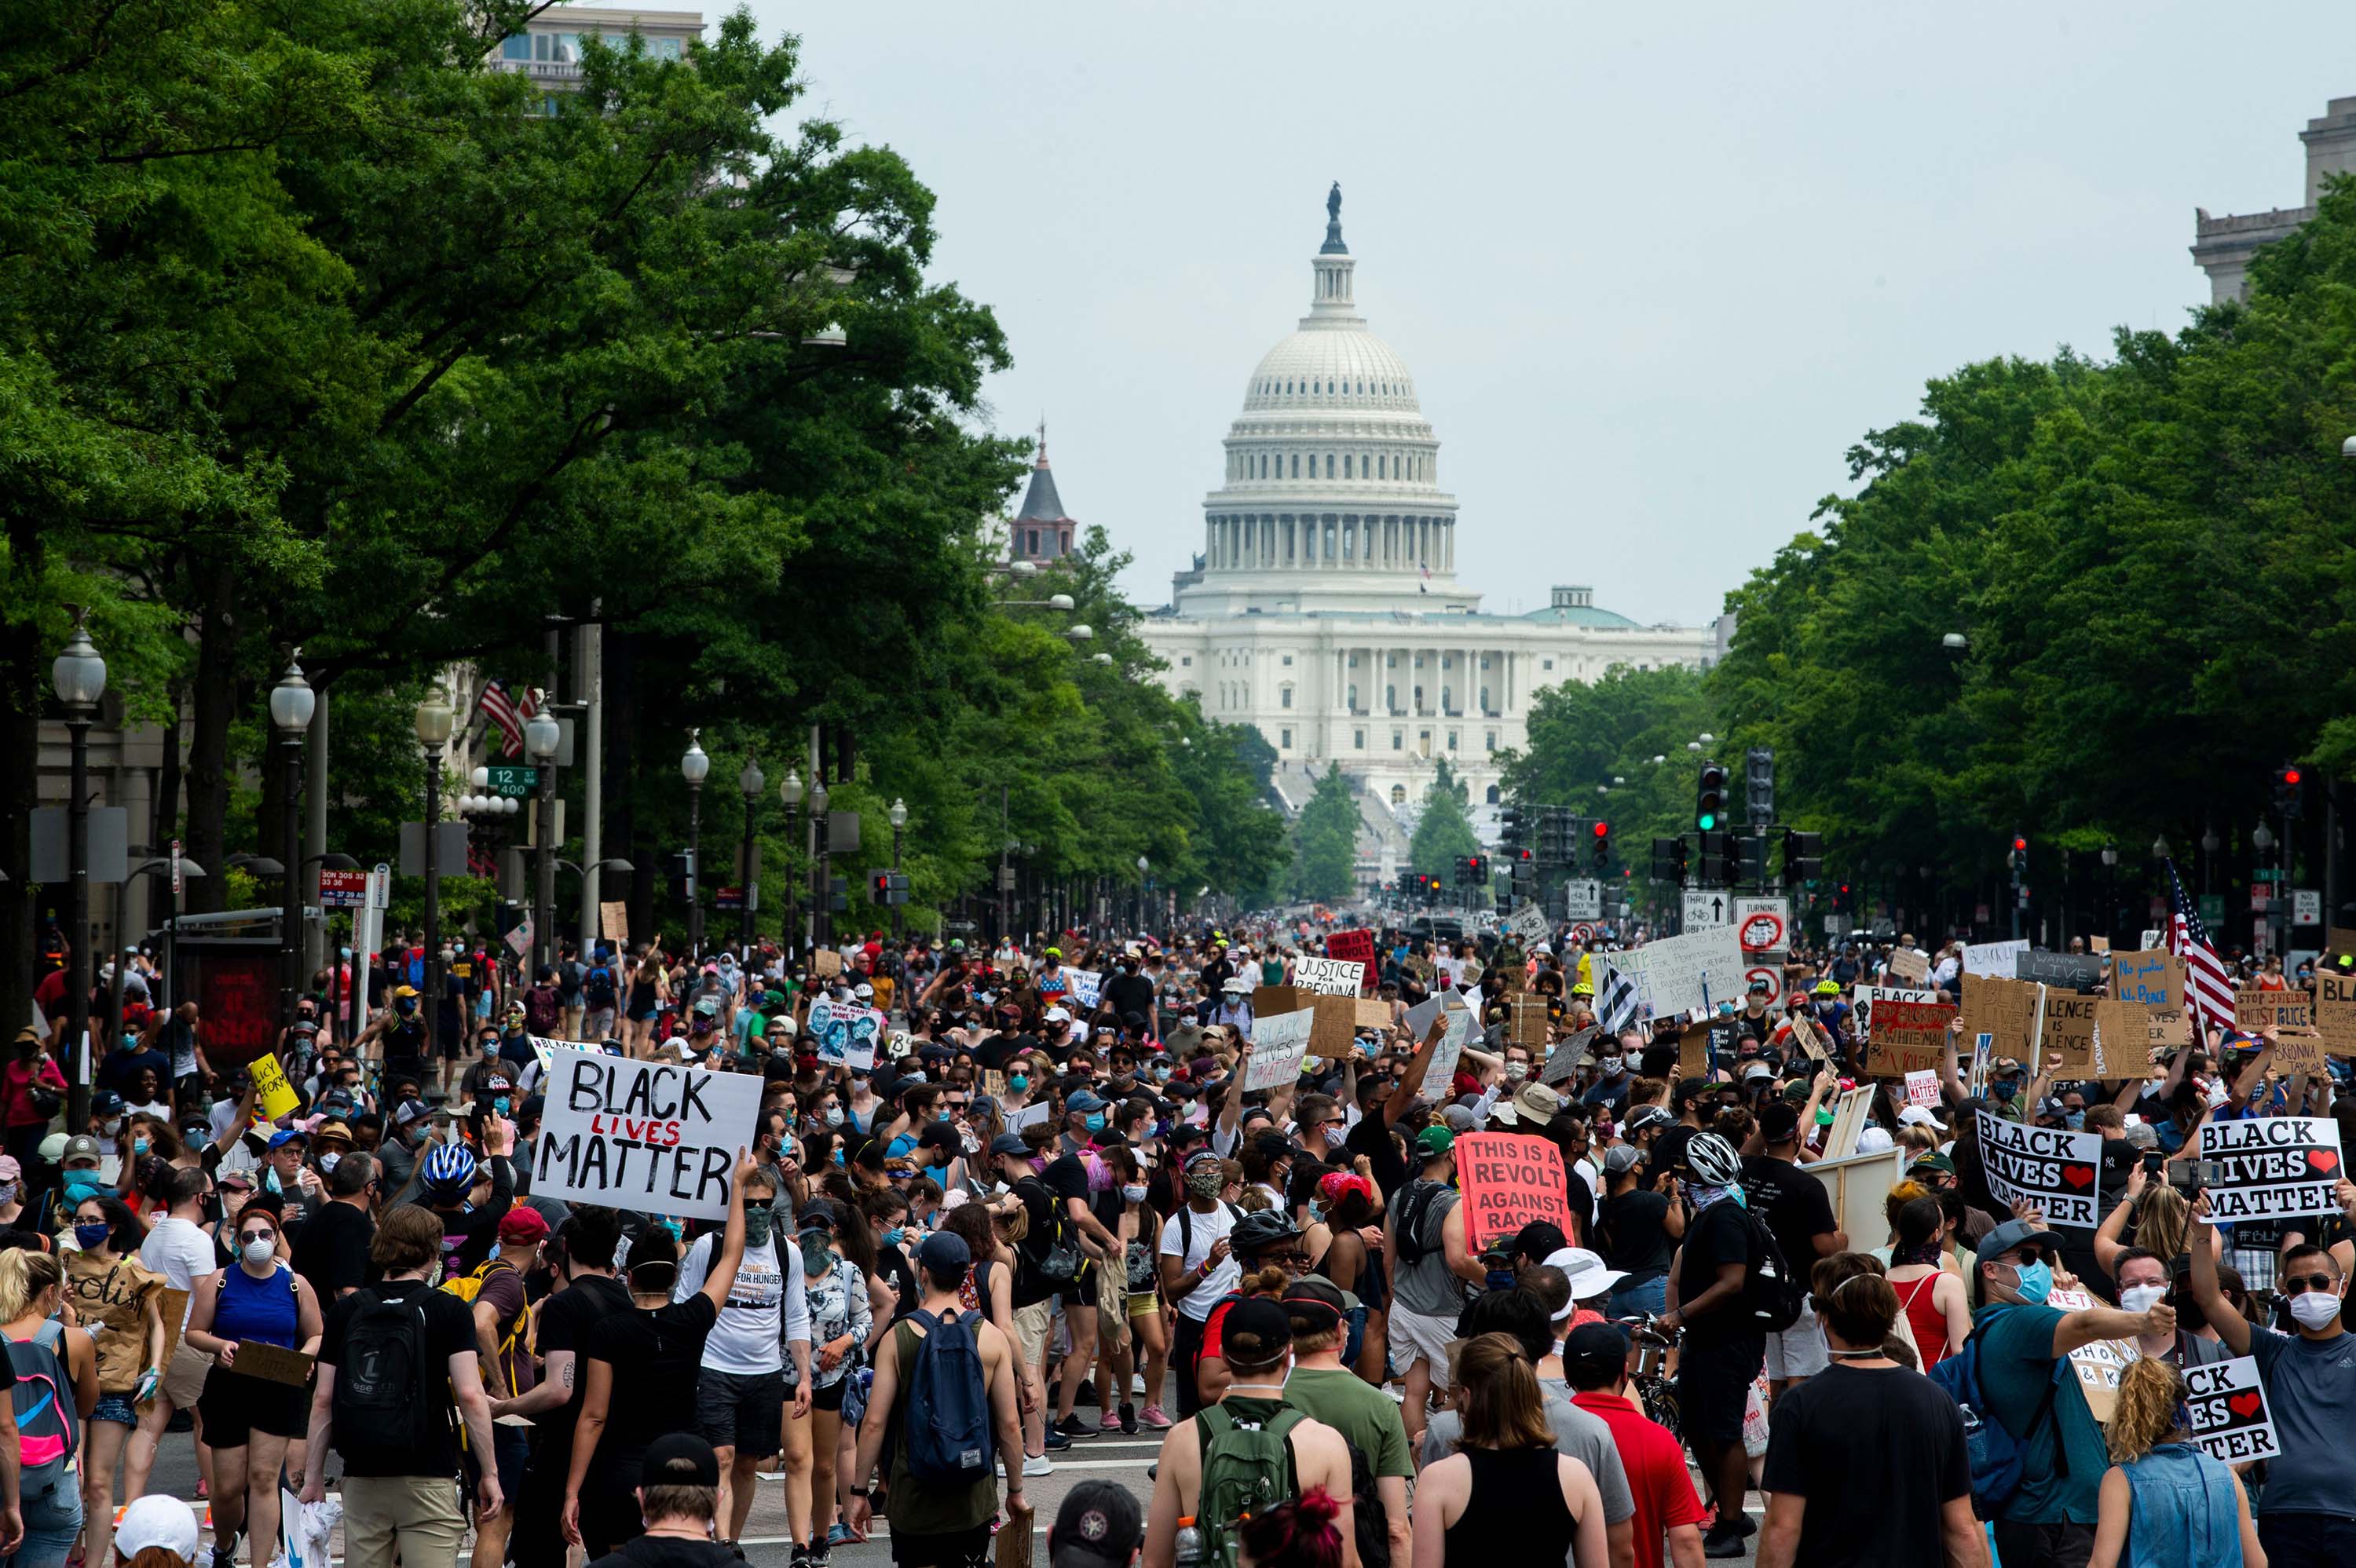 A crowd of protesters walk from the Capitol building to the White House during a protest against police brutality and racism, on June 6, in Washington, DC.